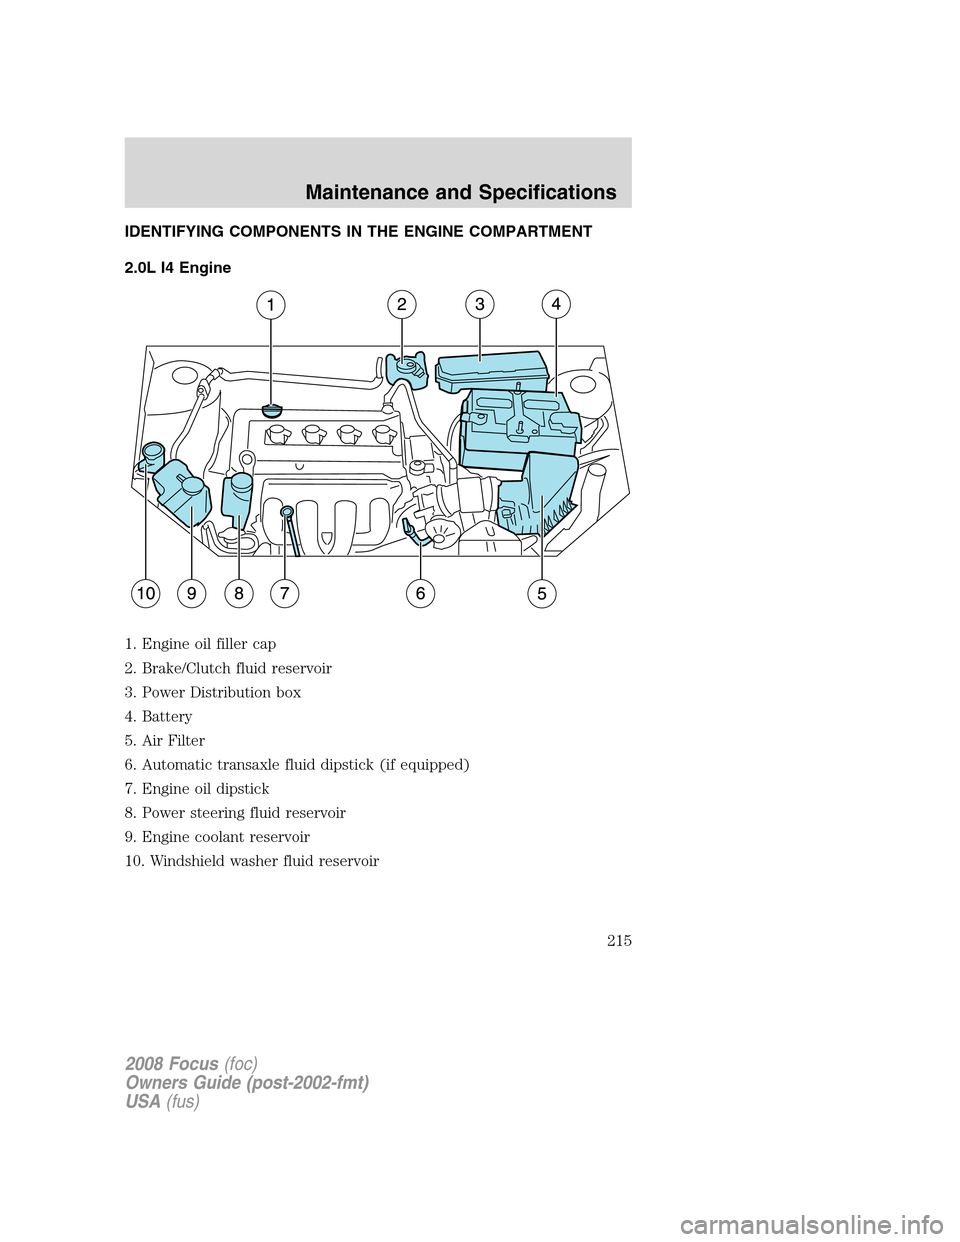 FORD FOCUS 2008 2.G Service Manual IDENTIFYING COMPONENTS IN THE ENGINE COMPARTMENT
2.0L I4 Engine
1. Engine oil filler cap
2. Brake/Clutch fluid reservoir
3. Power Distribution box
4. Battery
5. Air Filter
6. Automatic transaxle fluid